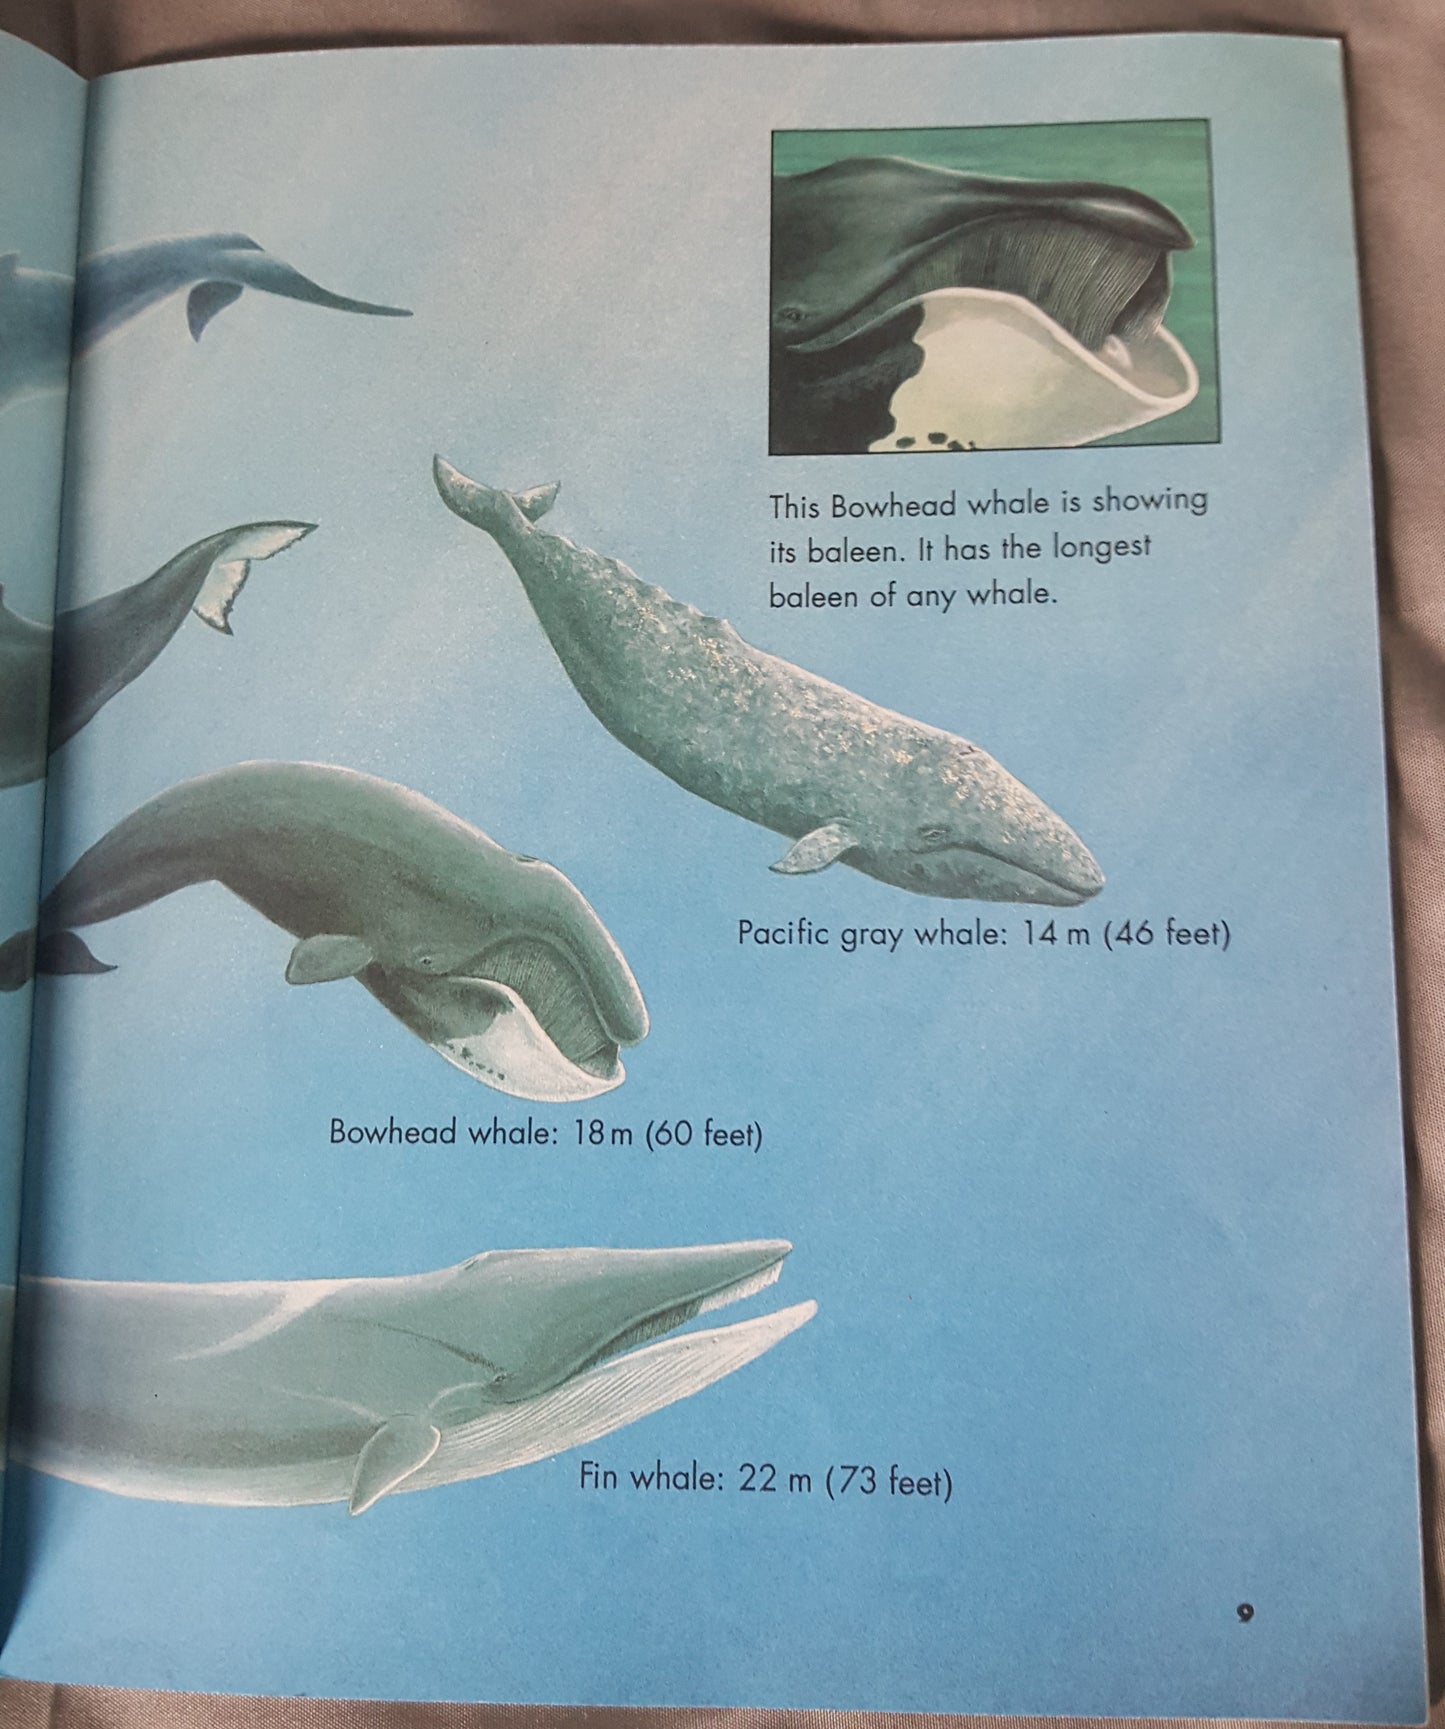 Whales - Killer Whales, Blue Whales  and More